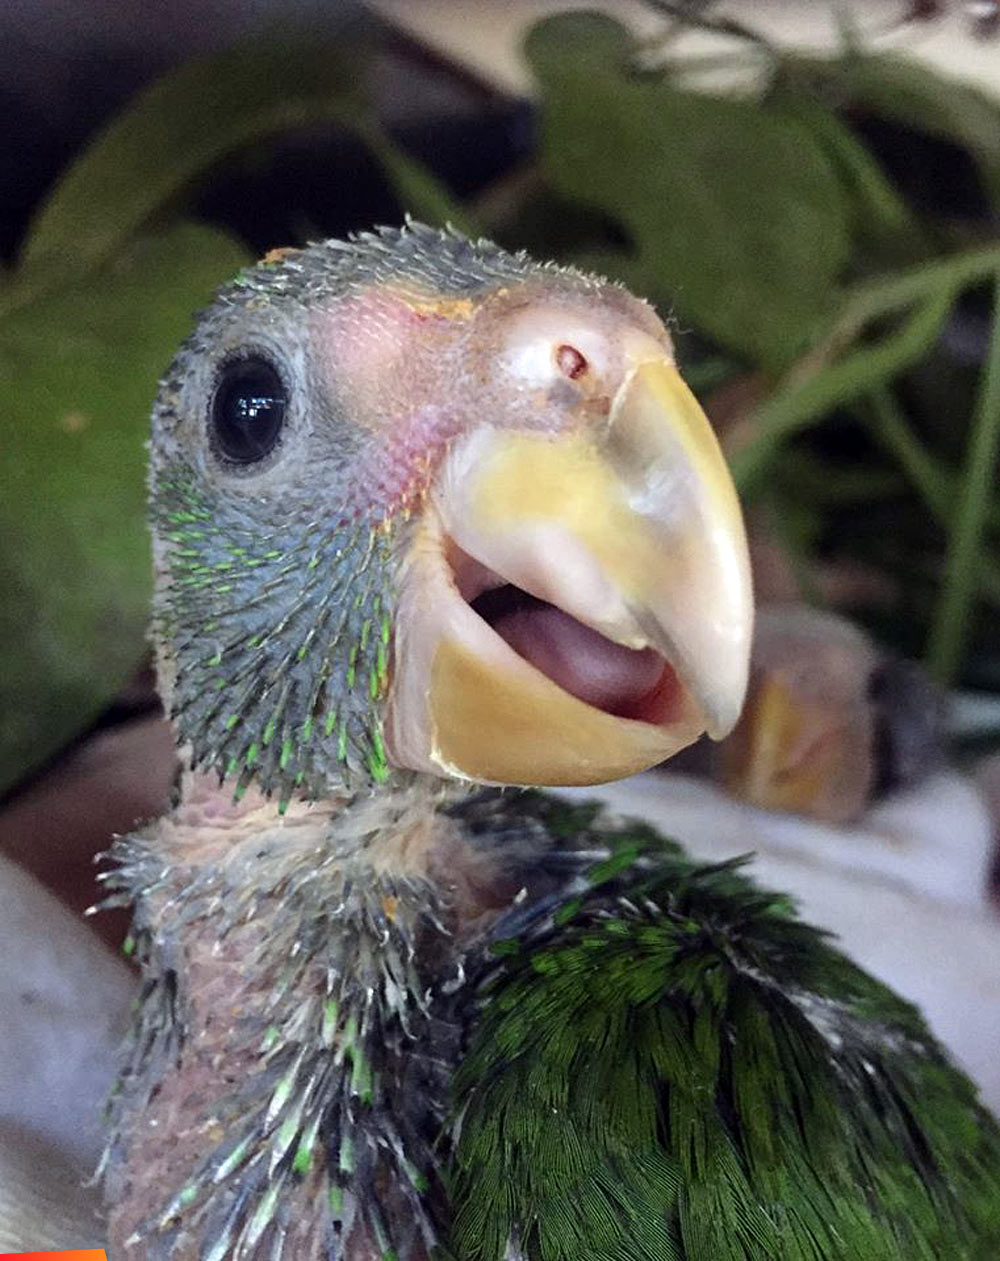 White fronted parrot chick